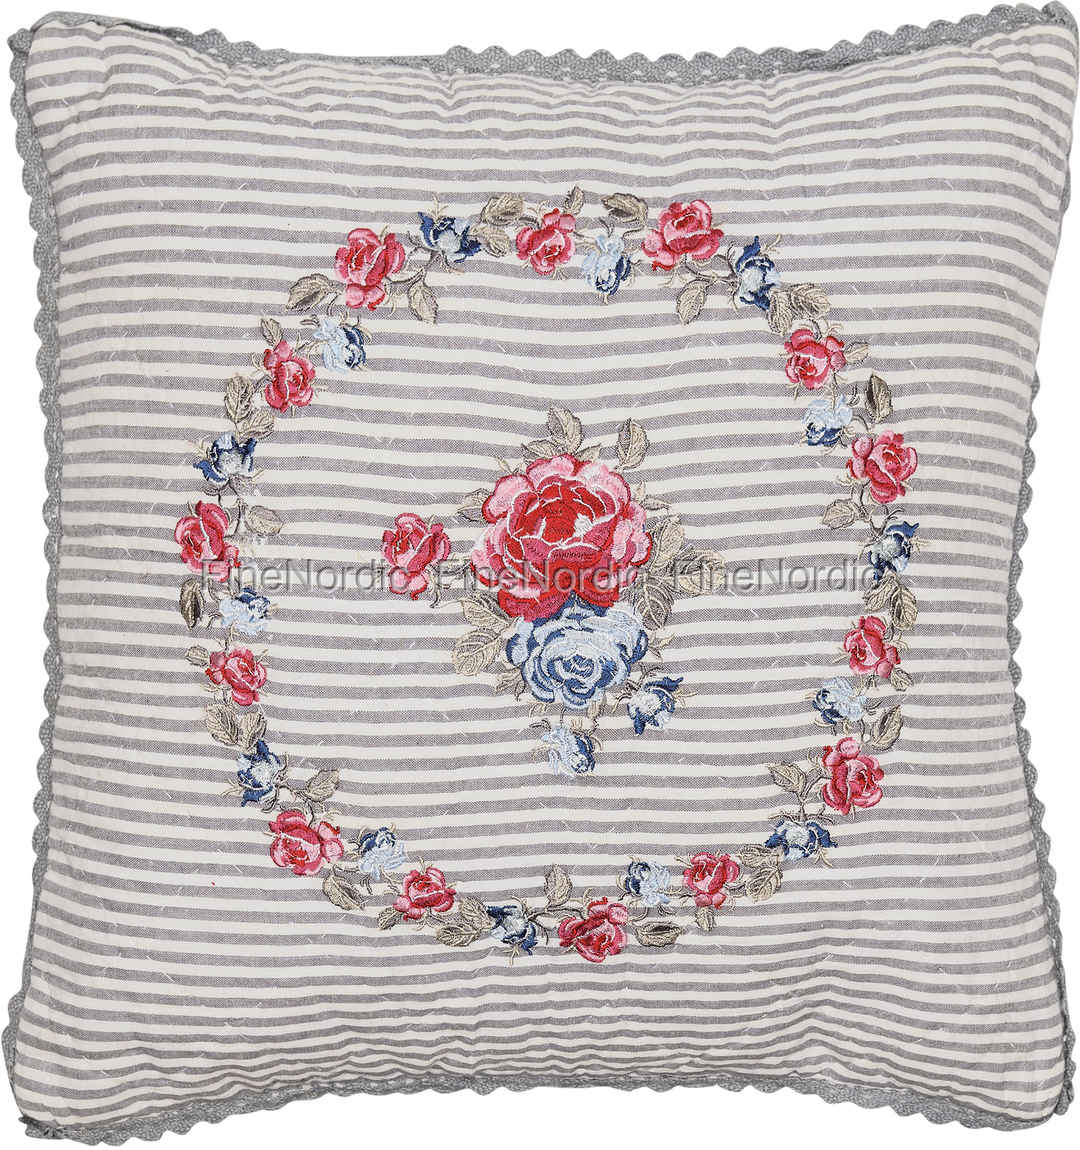 Cushion Cover Embroidery Patterns Greengate Cushion Cover Hailey White With Embroidery 40 X 40 Cm